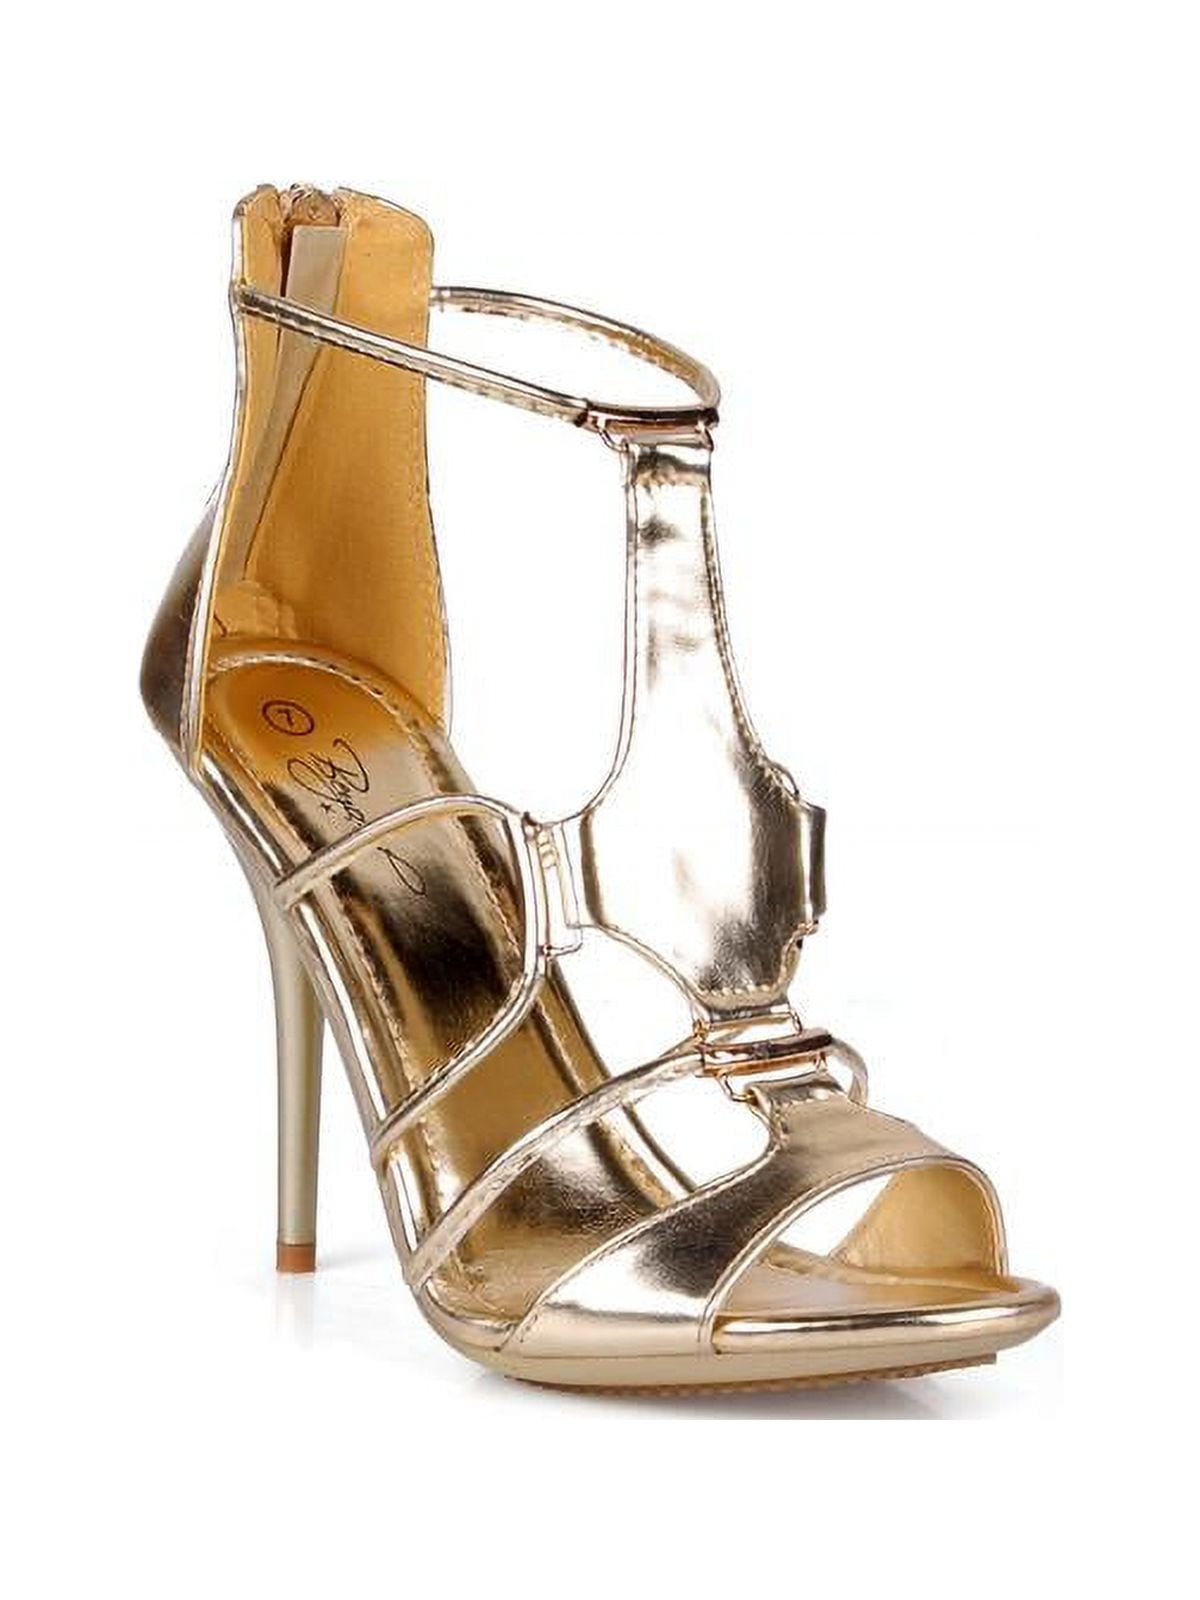 Leather sandals Tania Spinelli Gold size 37.5 EU in Leather - 26613672